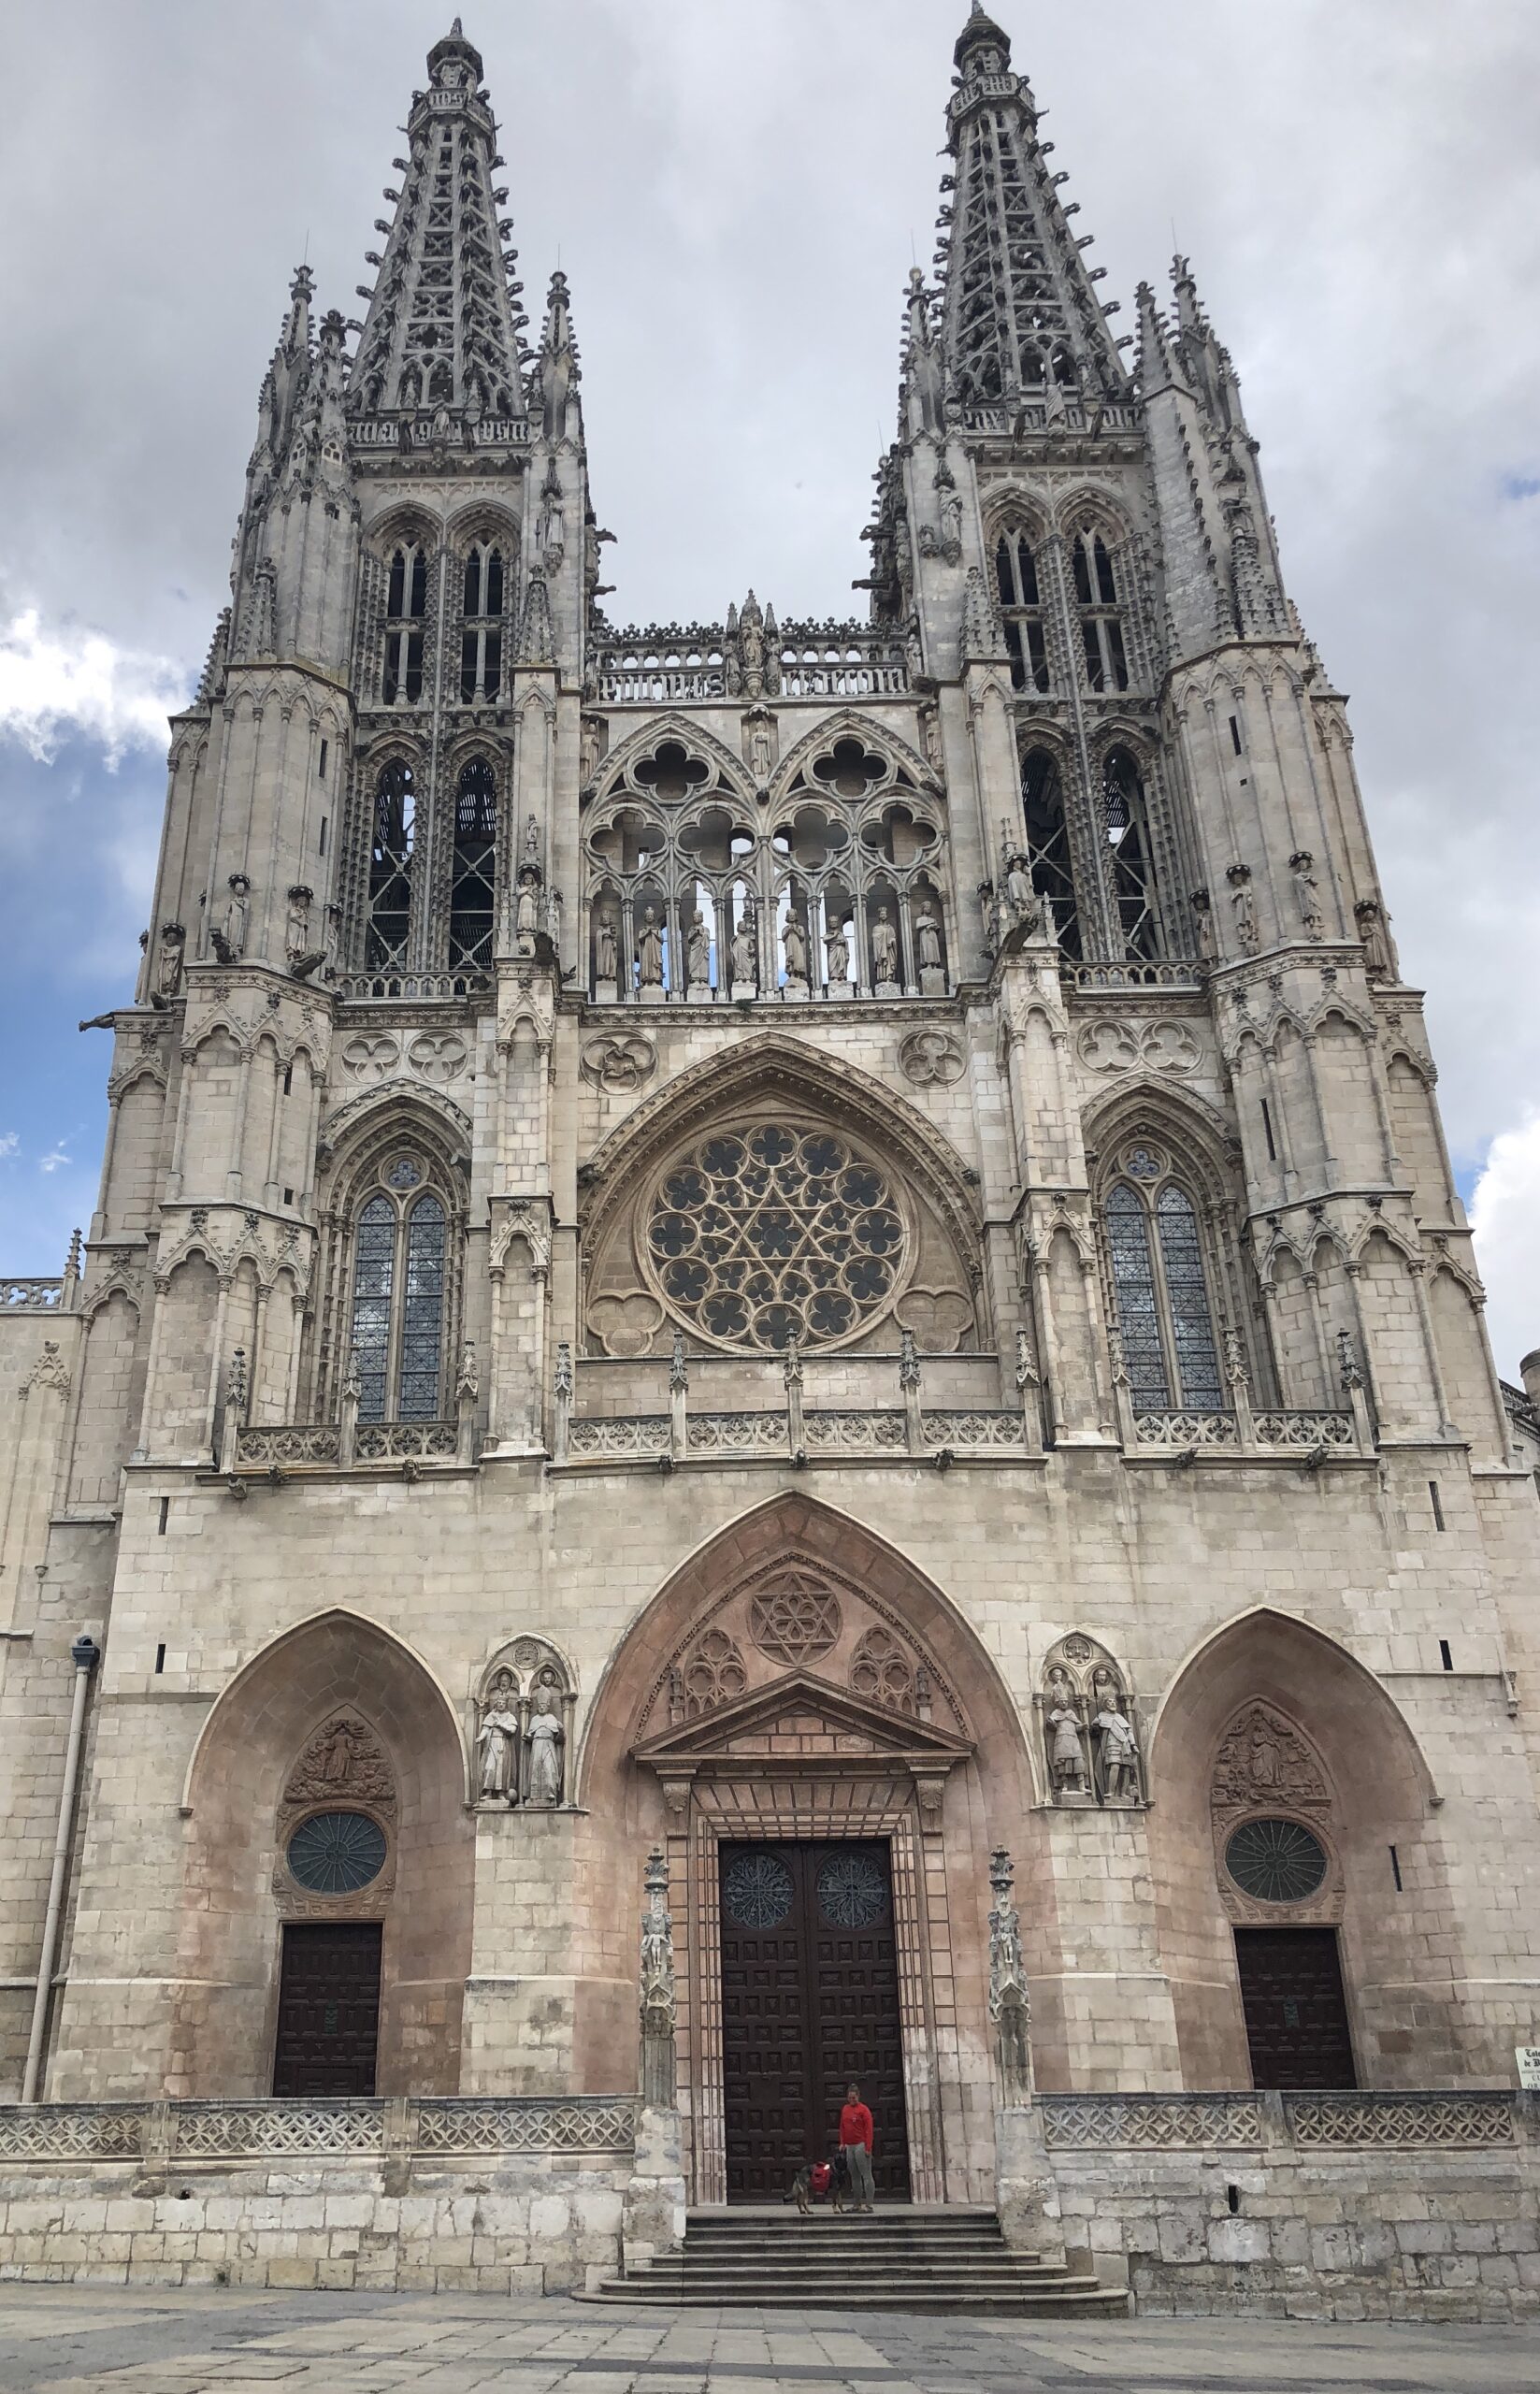 Feeling like ants beneath the towering walls of Burgos Cathedral